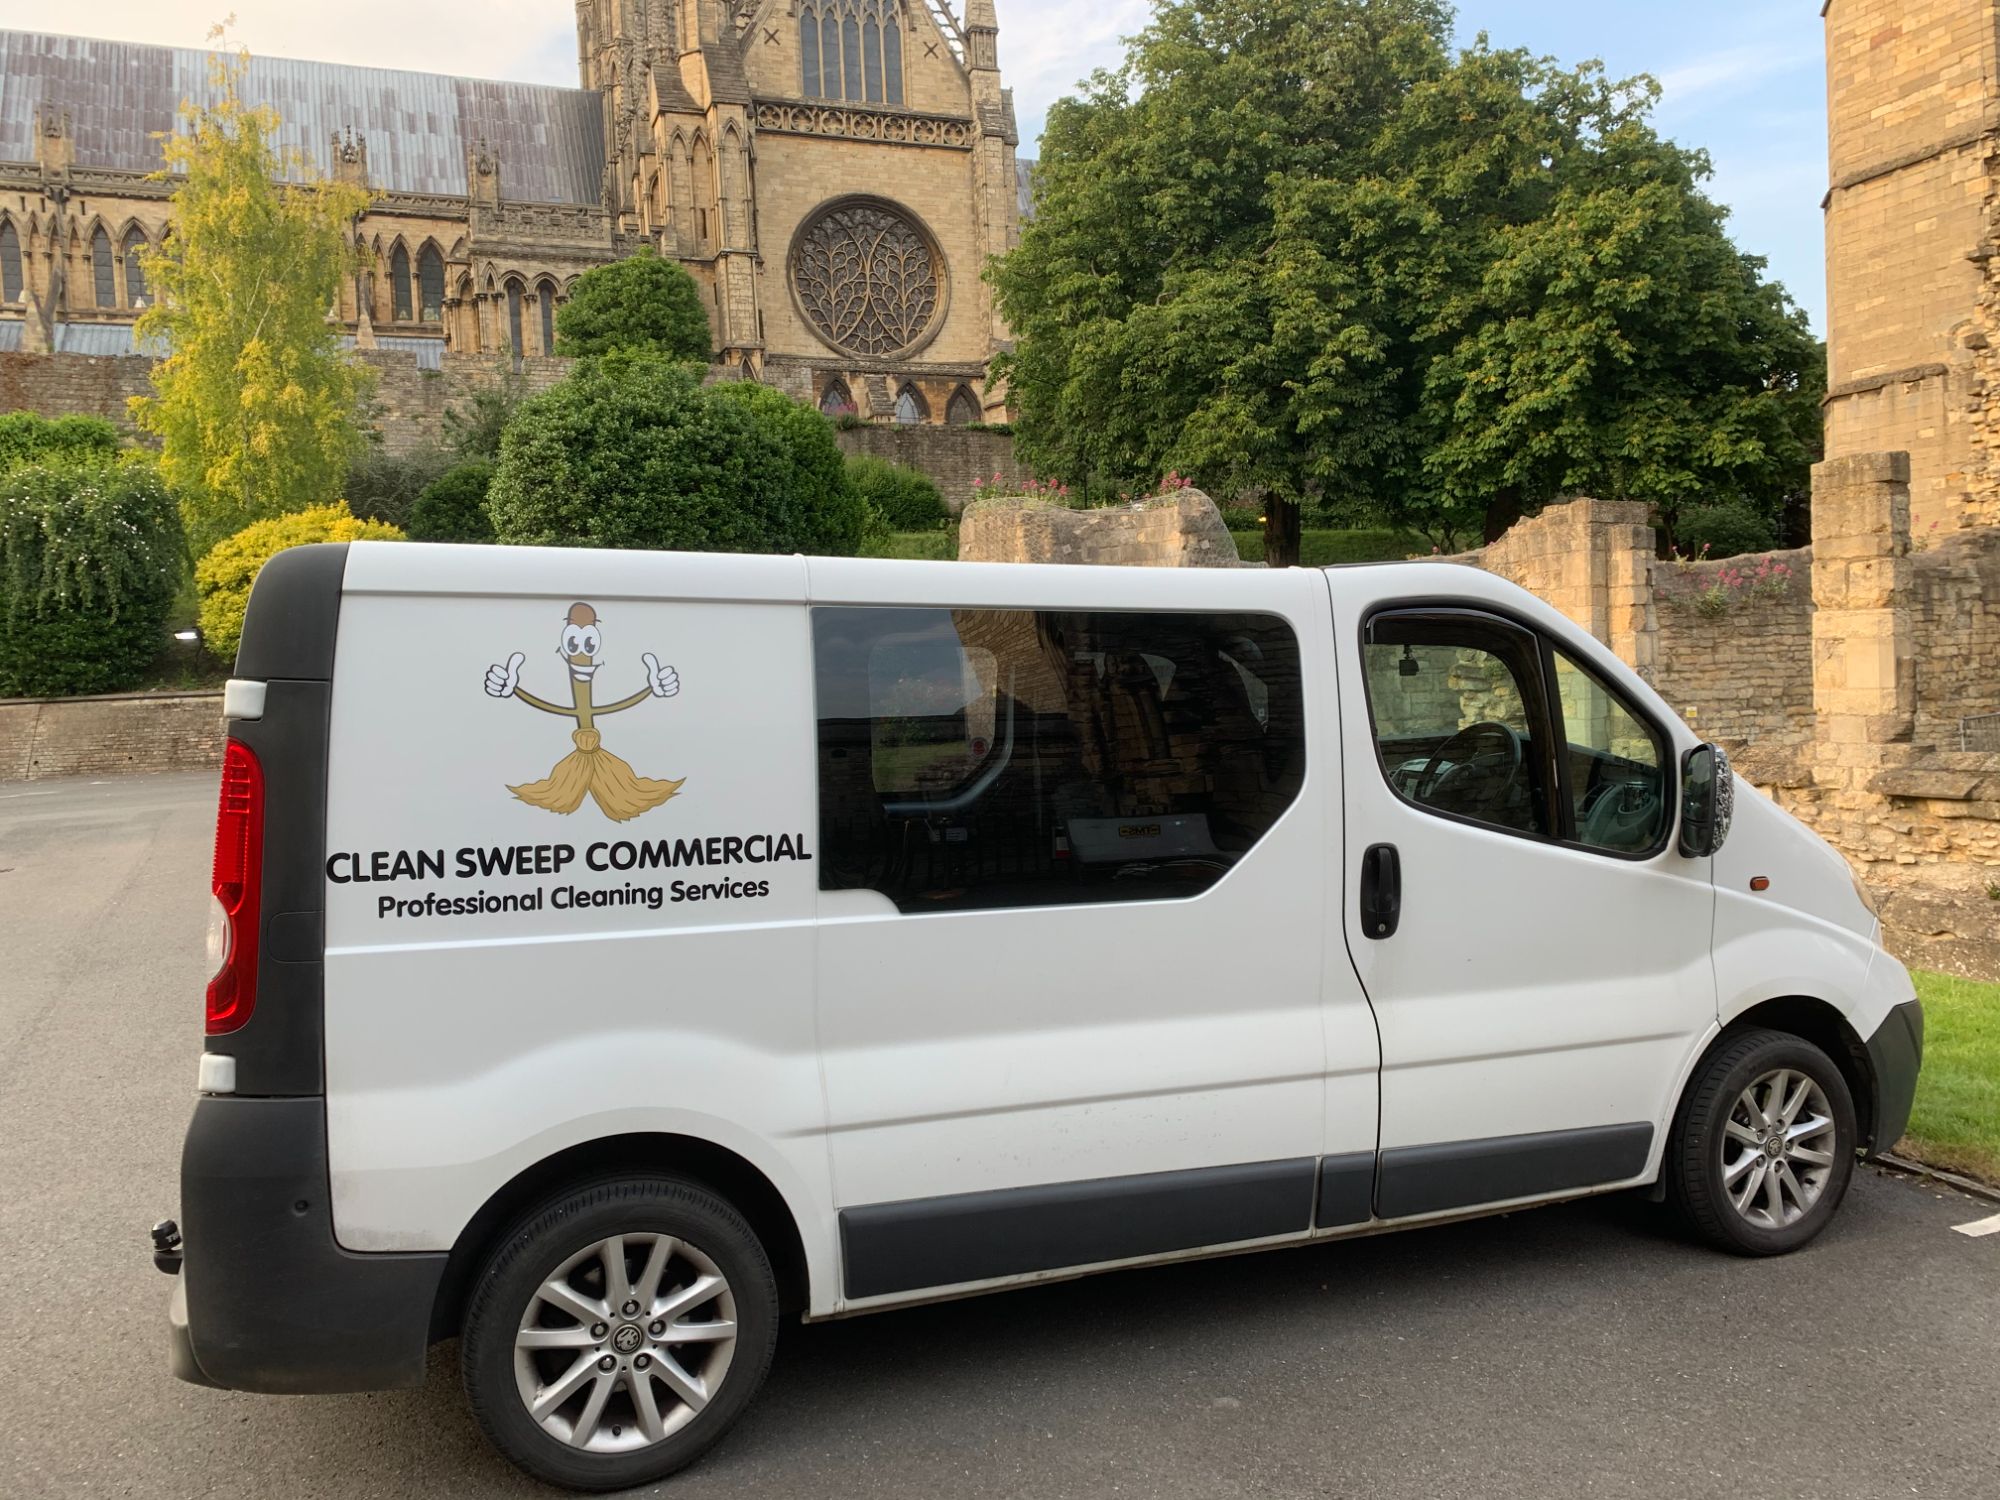 cleansweep-commercial-van-outside-lincoln-cathedral 